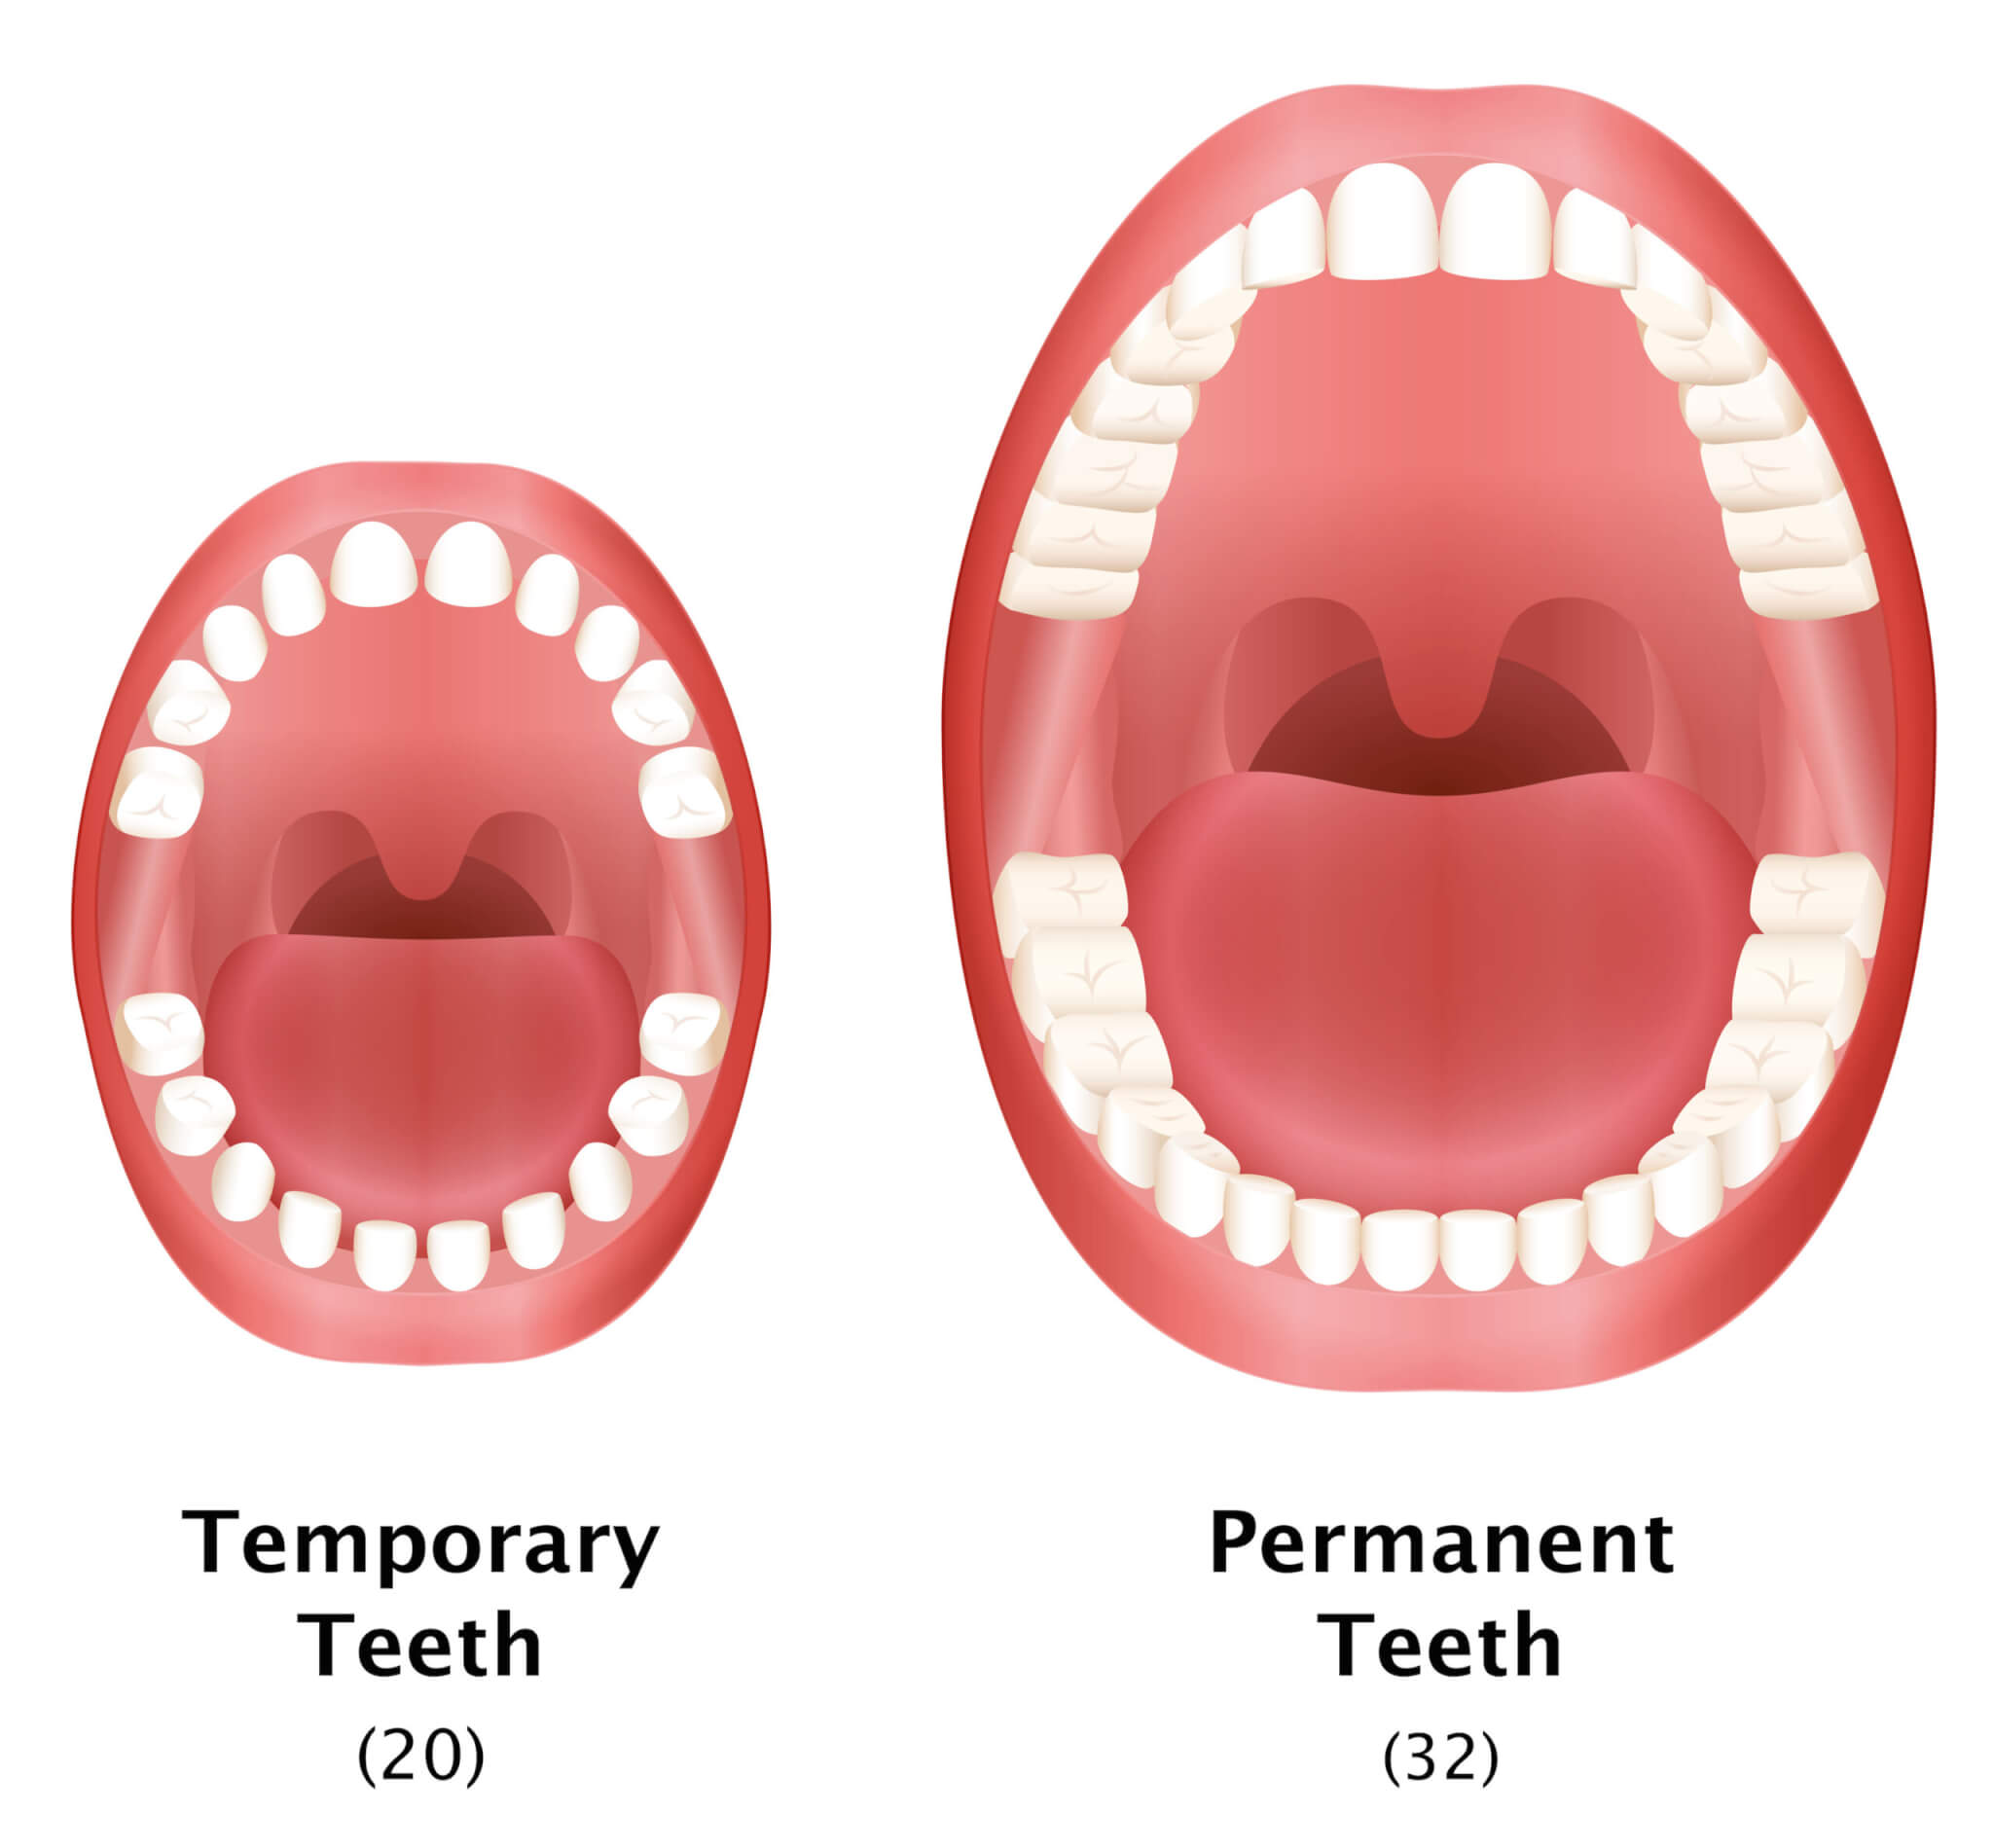 How to distinguish baby teeth and permanent teeth